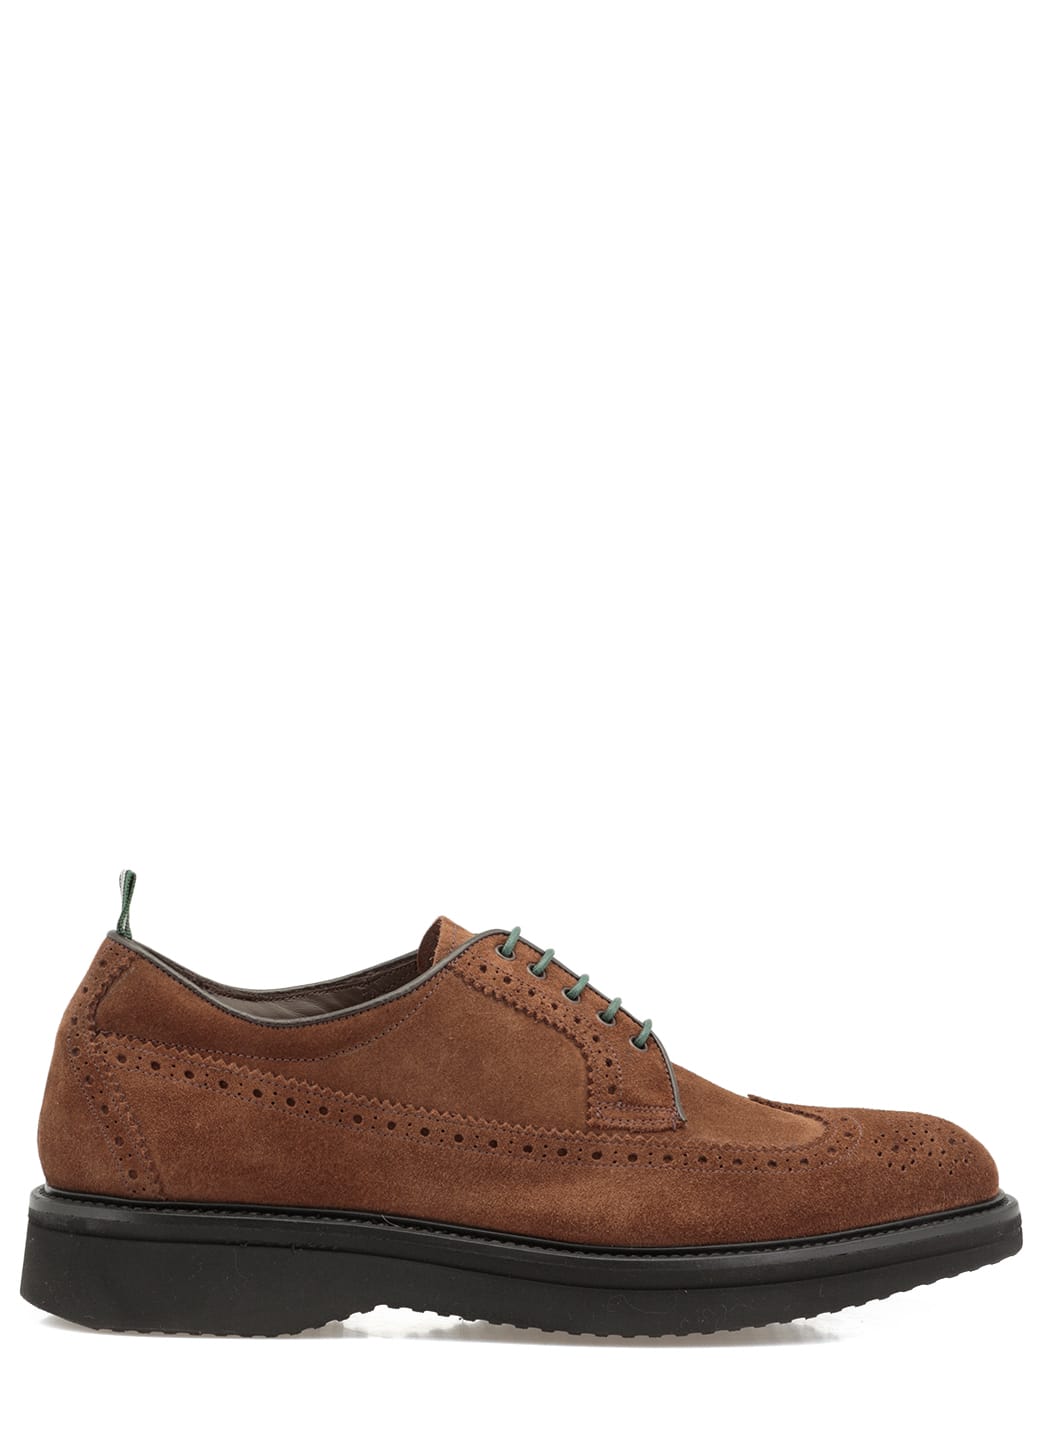 Green George Suede Leather Brogue Lace Up Shoe